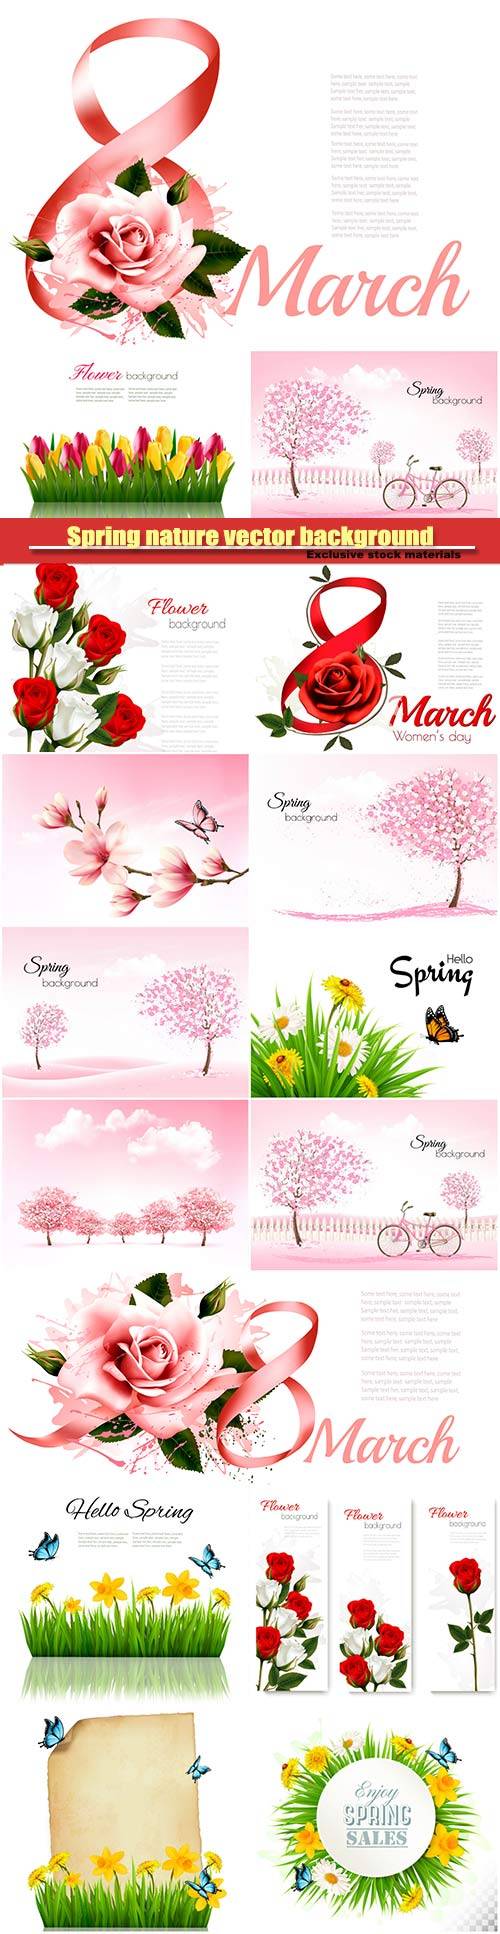 8th March illustration with rose, women's day, spring nature vector background